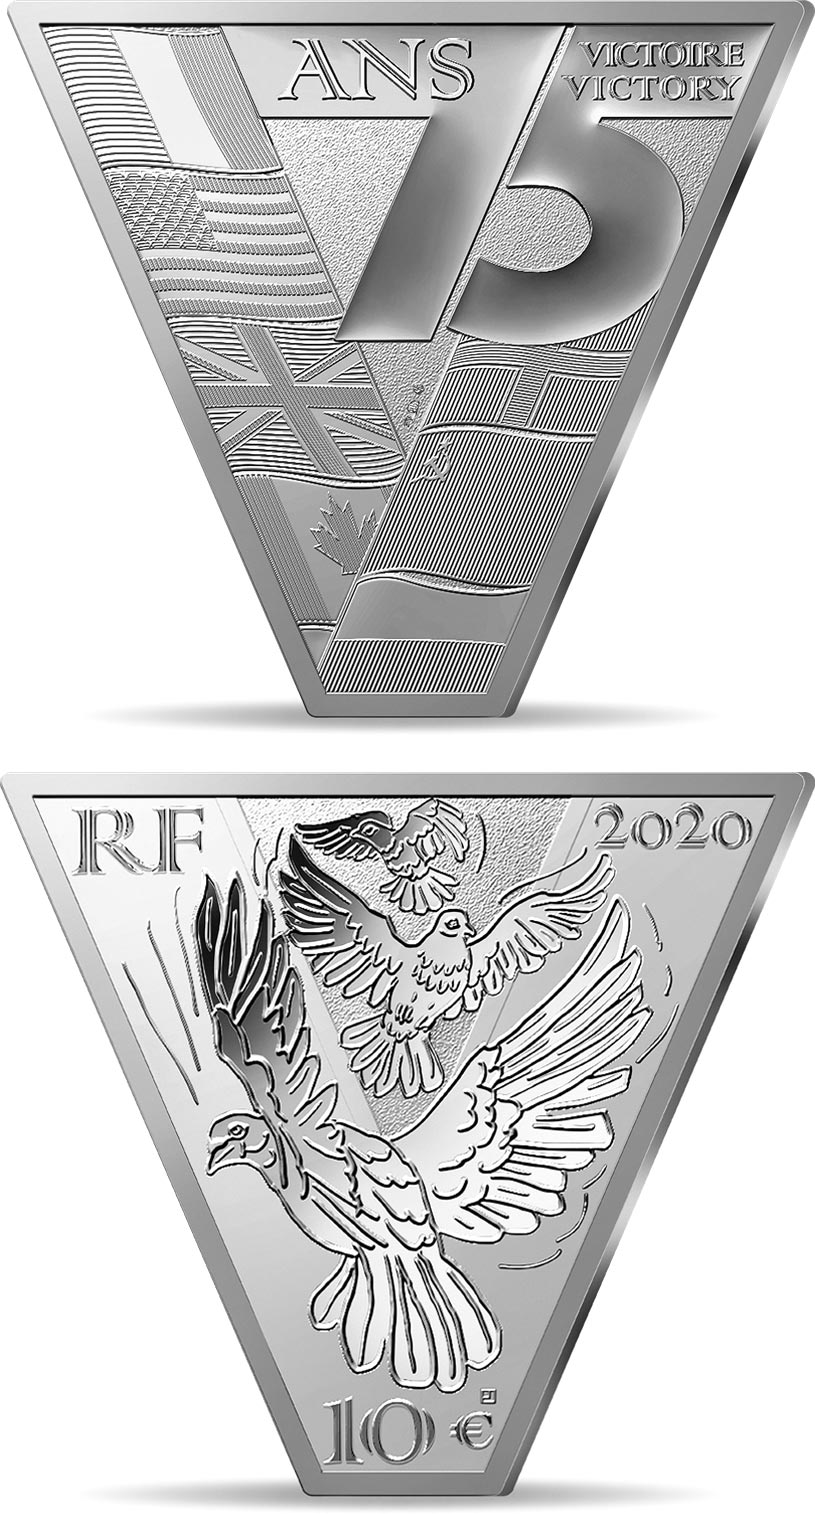 Image of 10 euro coin - Victory Peace | France 2020.  The Silver coin is of Proof quality.